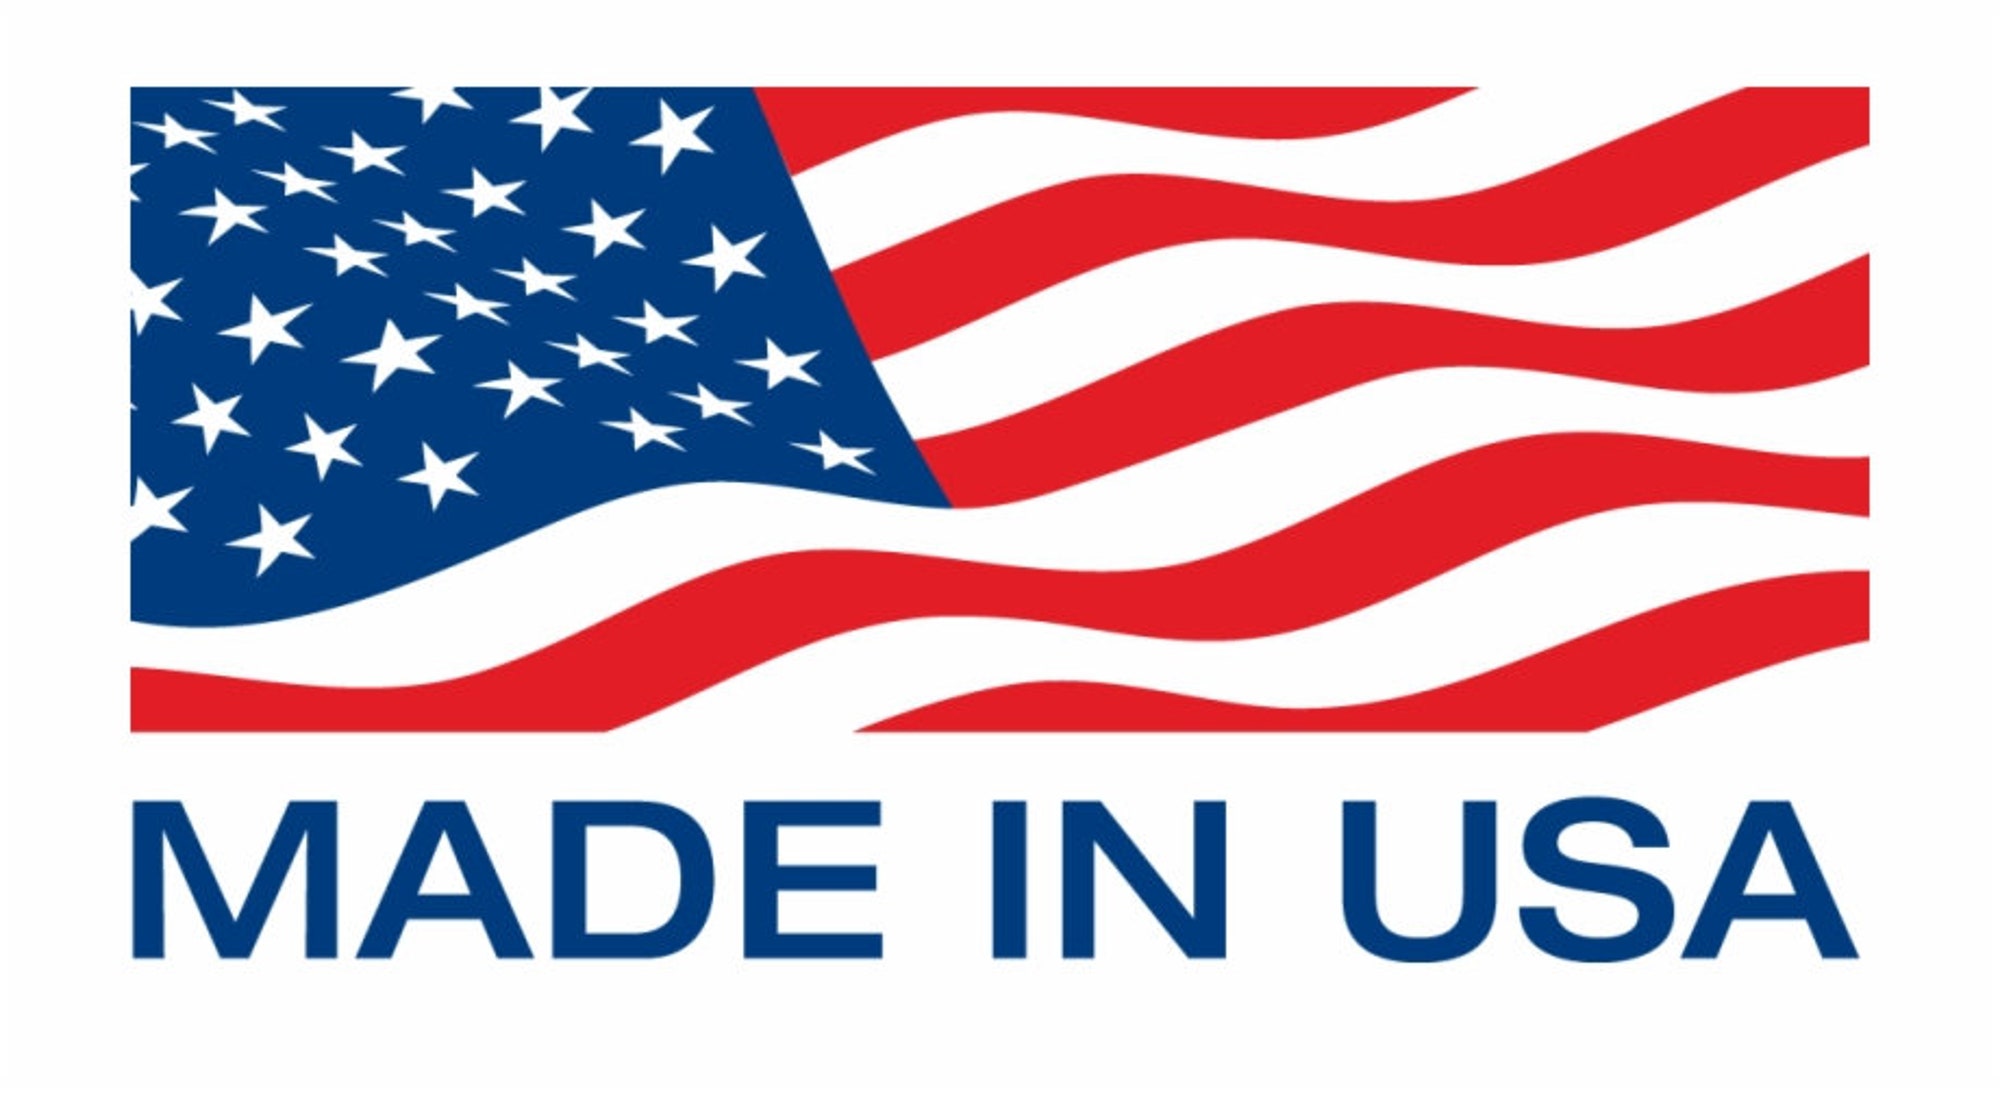 American Flag Camouflage Tailgate Truck Bed Decal